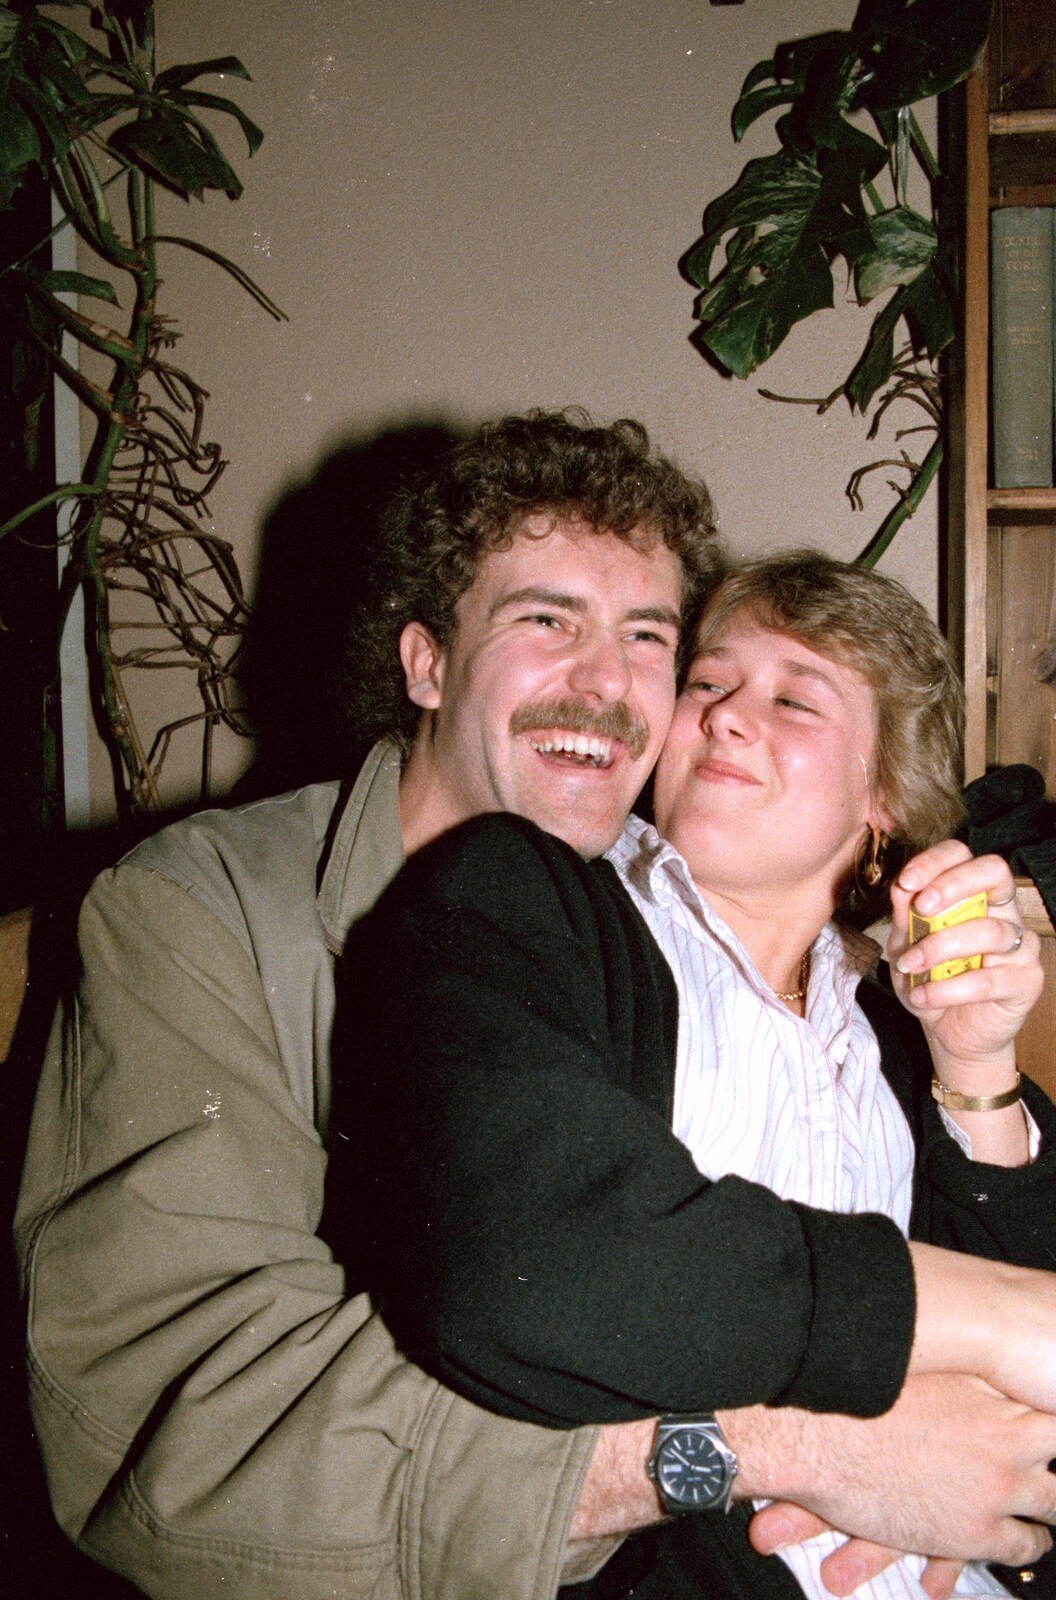 Uni: Gill Leaves the James Street Vaults, Plymouth - 30th May 1986: Sam Kennedy and his girlfriend